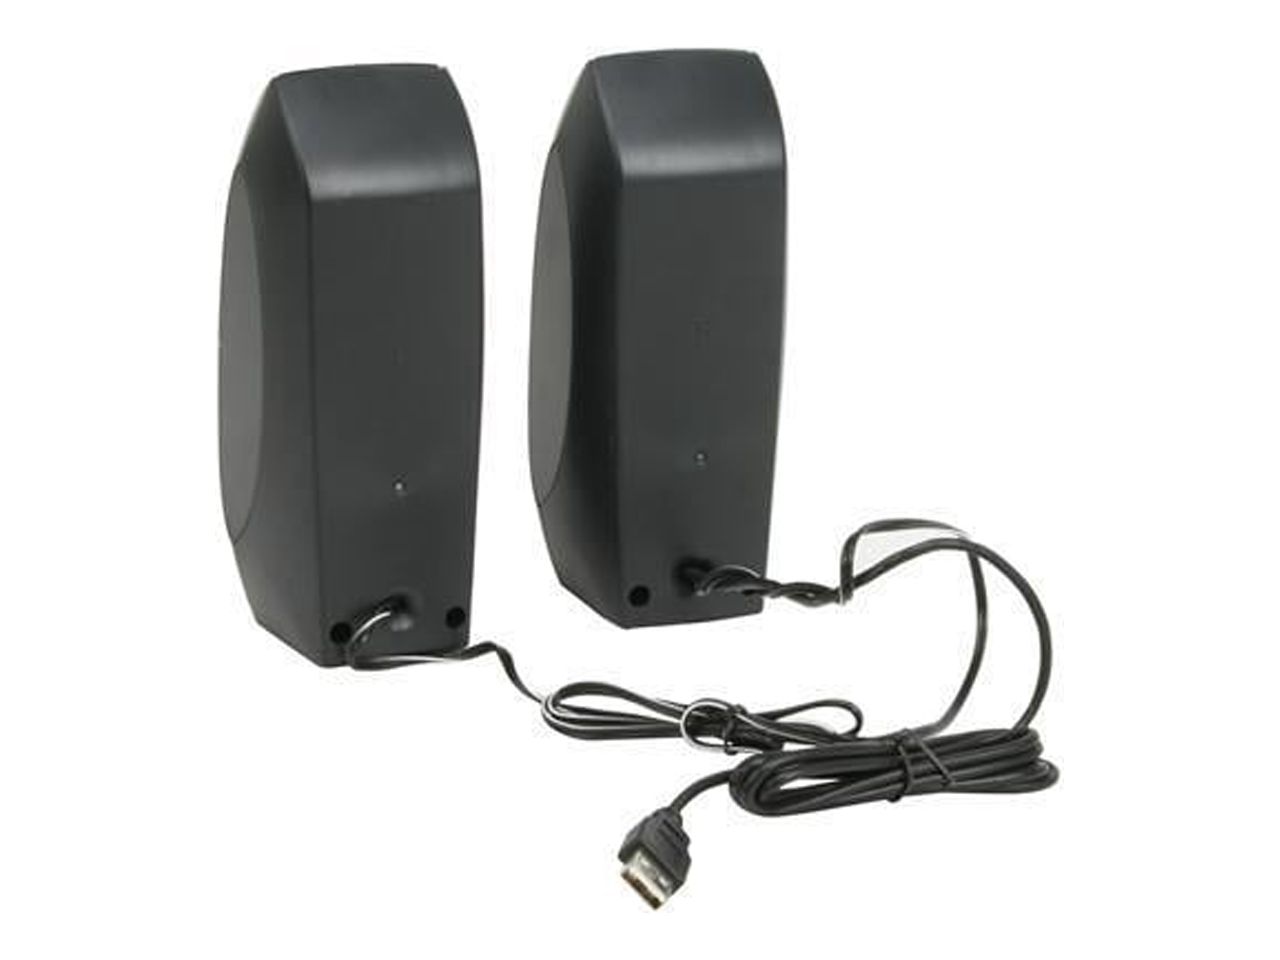 Logitech S150 USB Speakers with Digital Sound - image 3 of 5